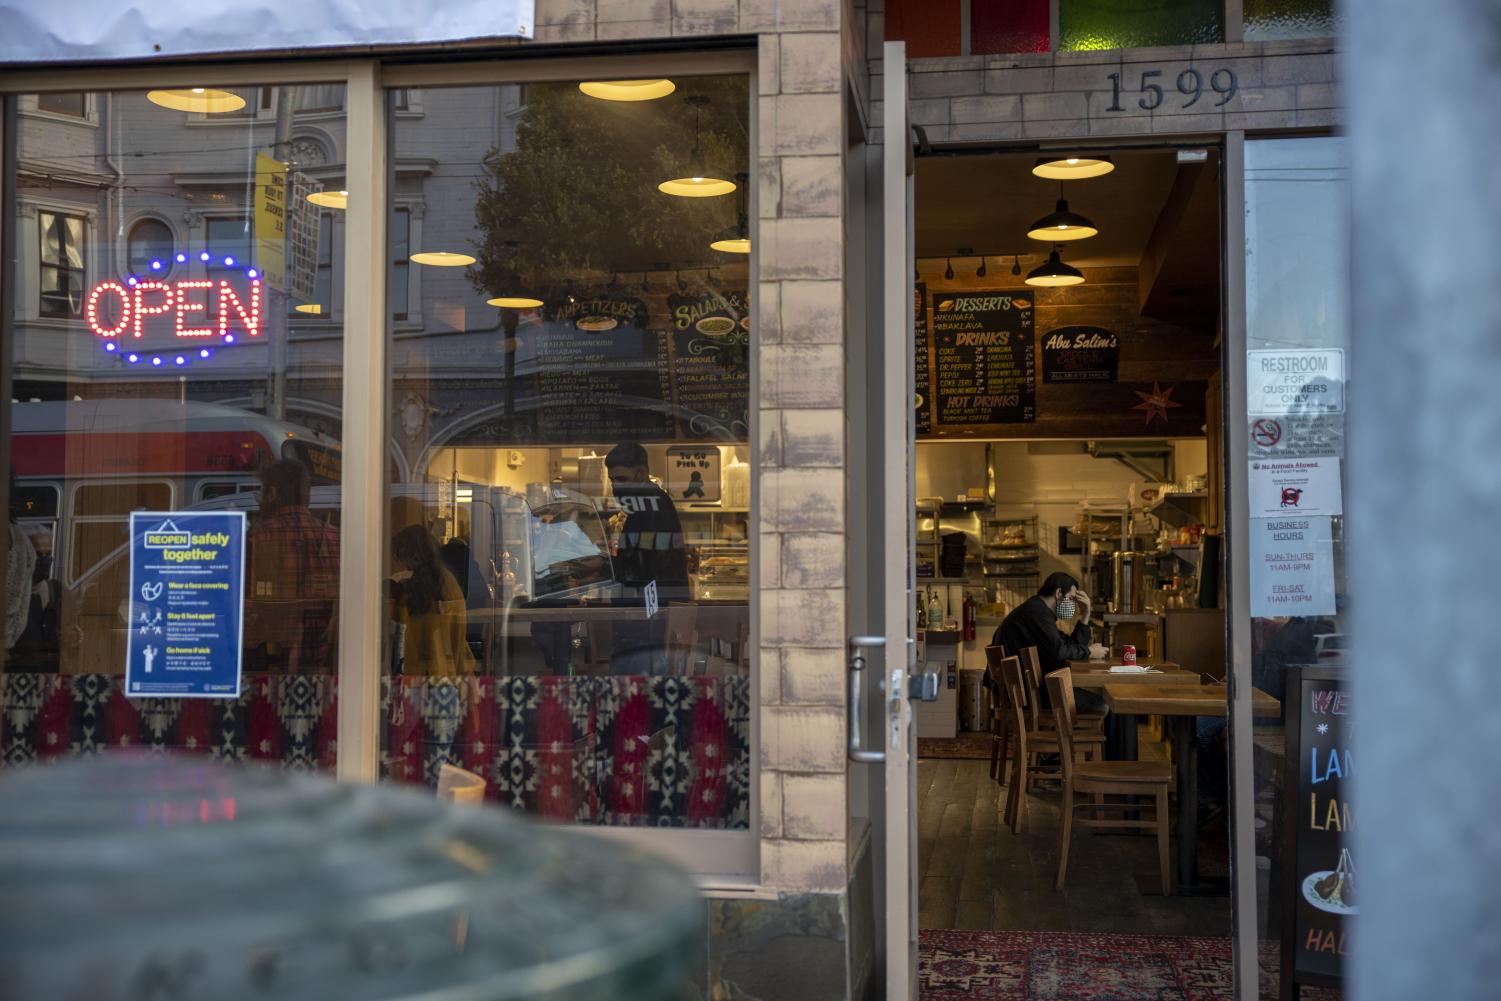 SF+family+opens+new+Palestinian+restaurant+after+fire+at+Mission+location